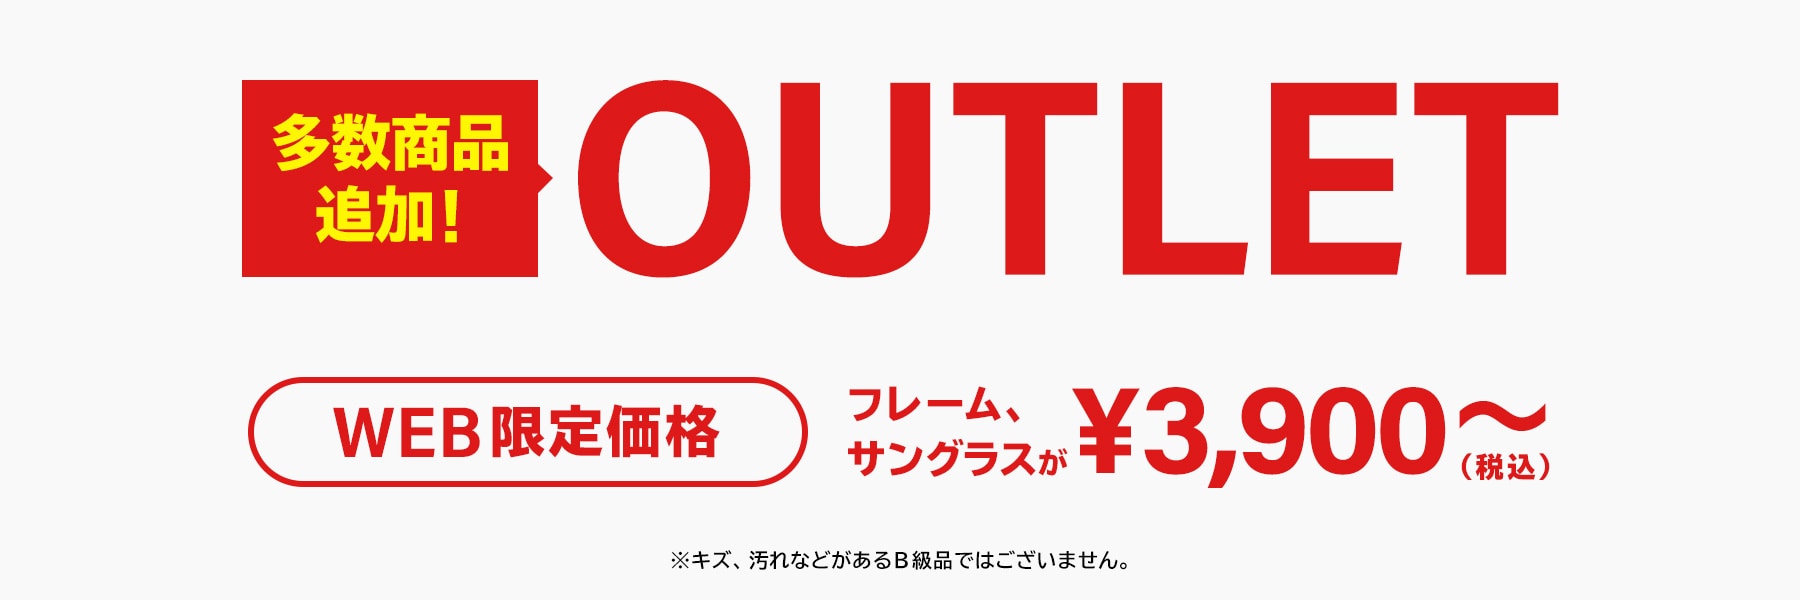 OUTLET WEB限定価格